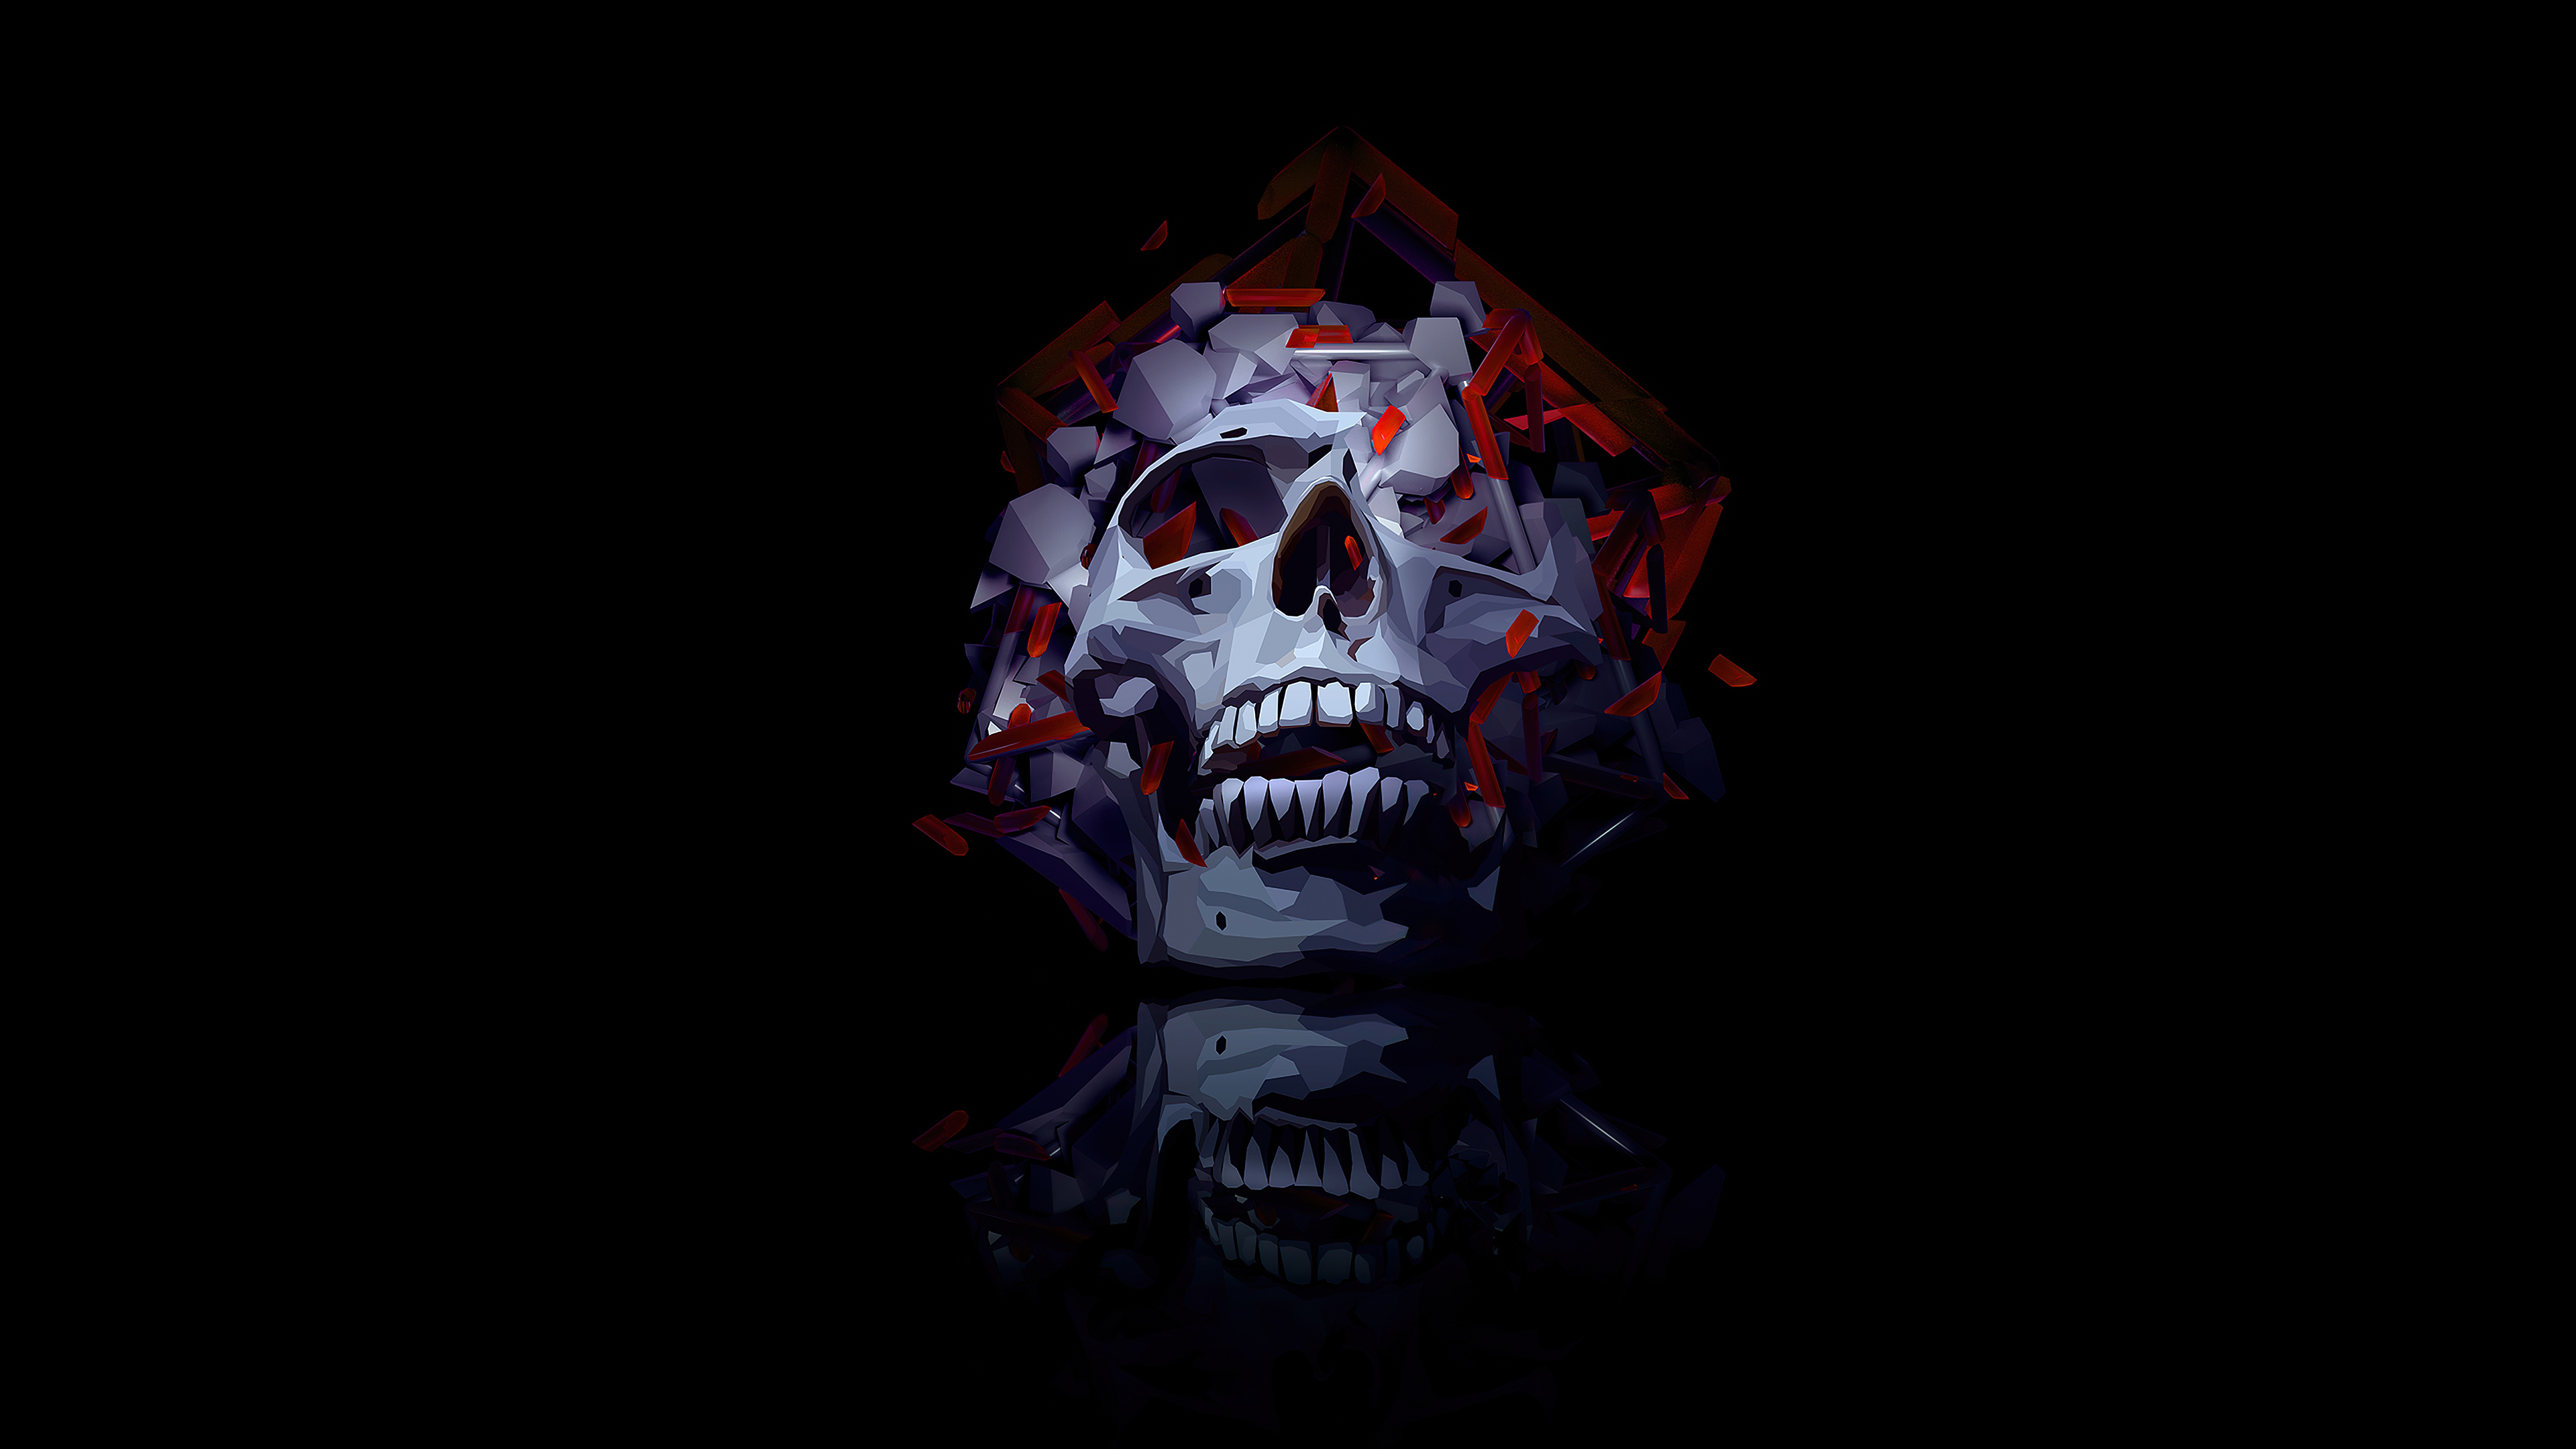 Skull Roses 4k, HD Artist, 4k Wallpaper, Image, Background, Photo and Picture